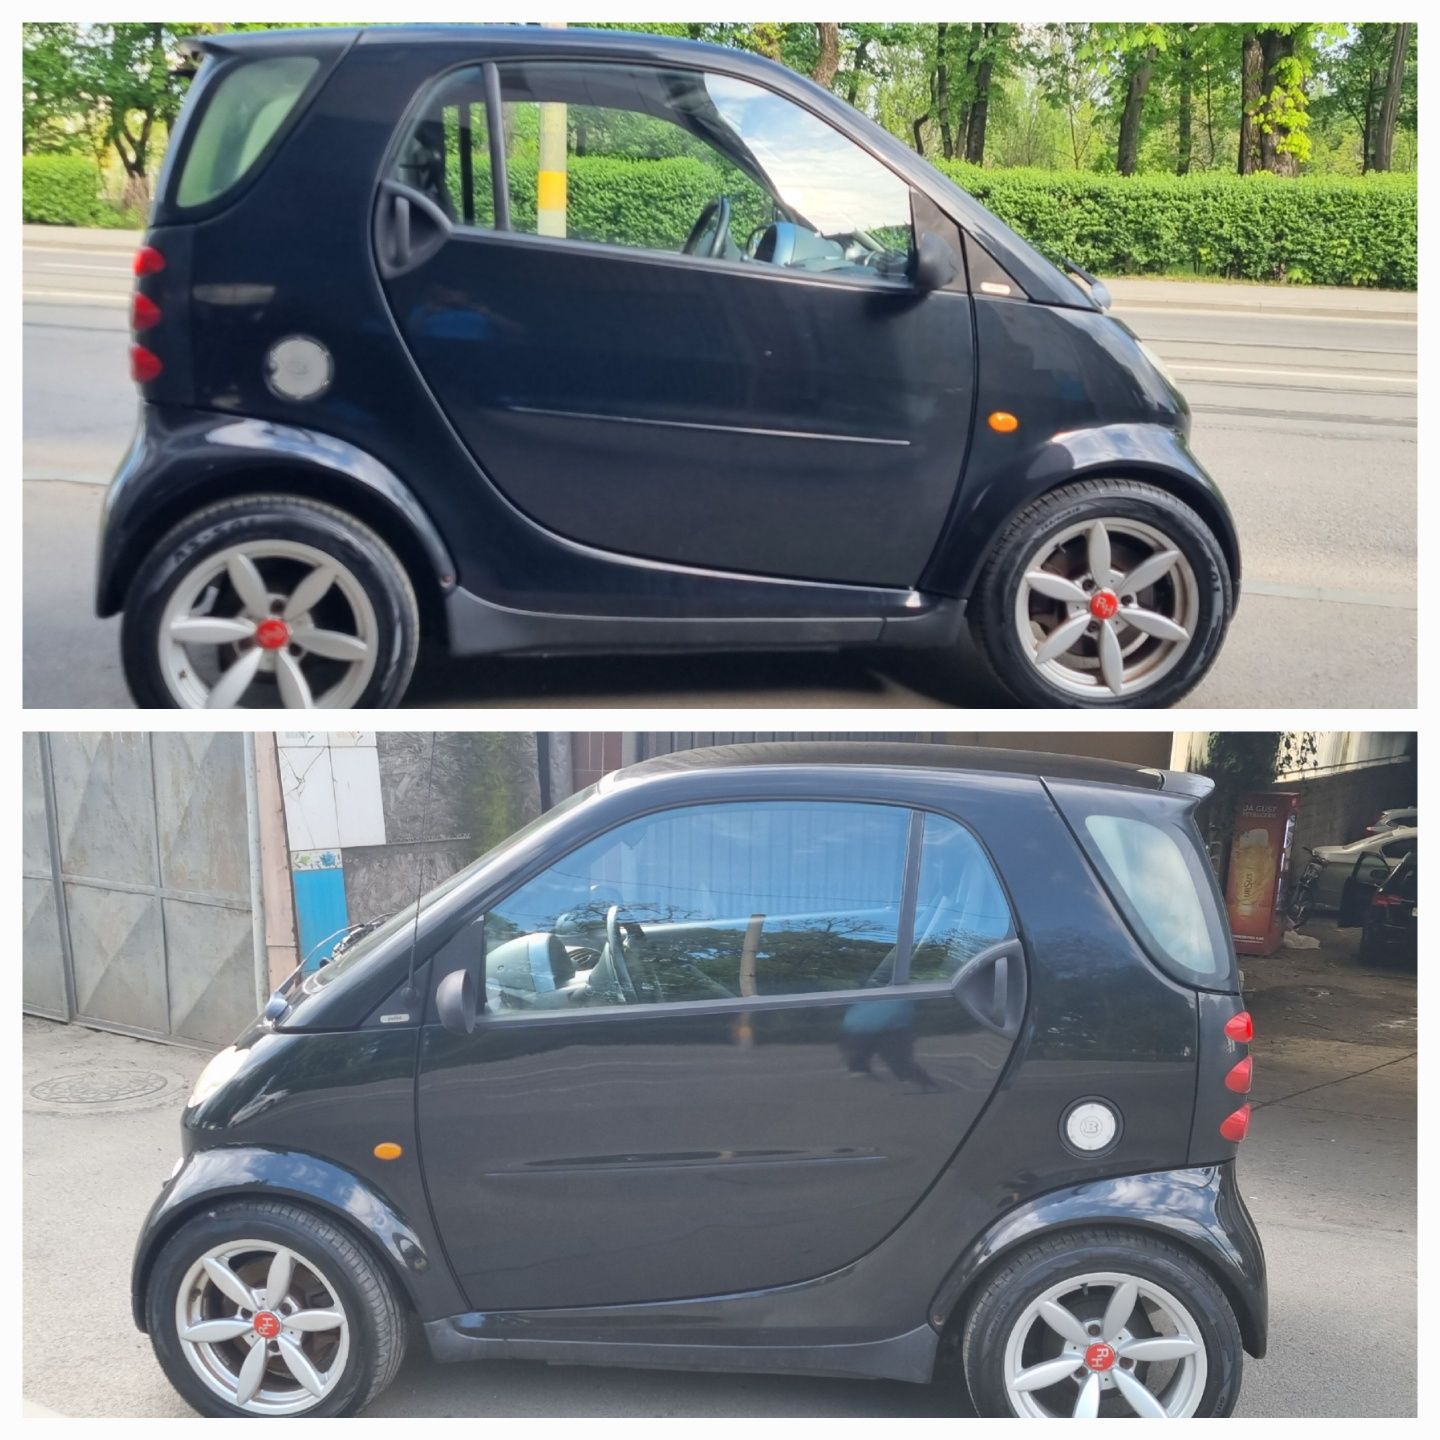 Smart Fortwo automat functional panoramic